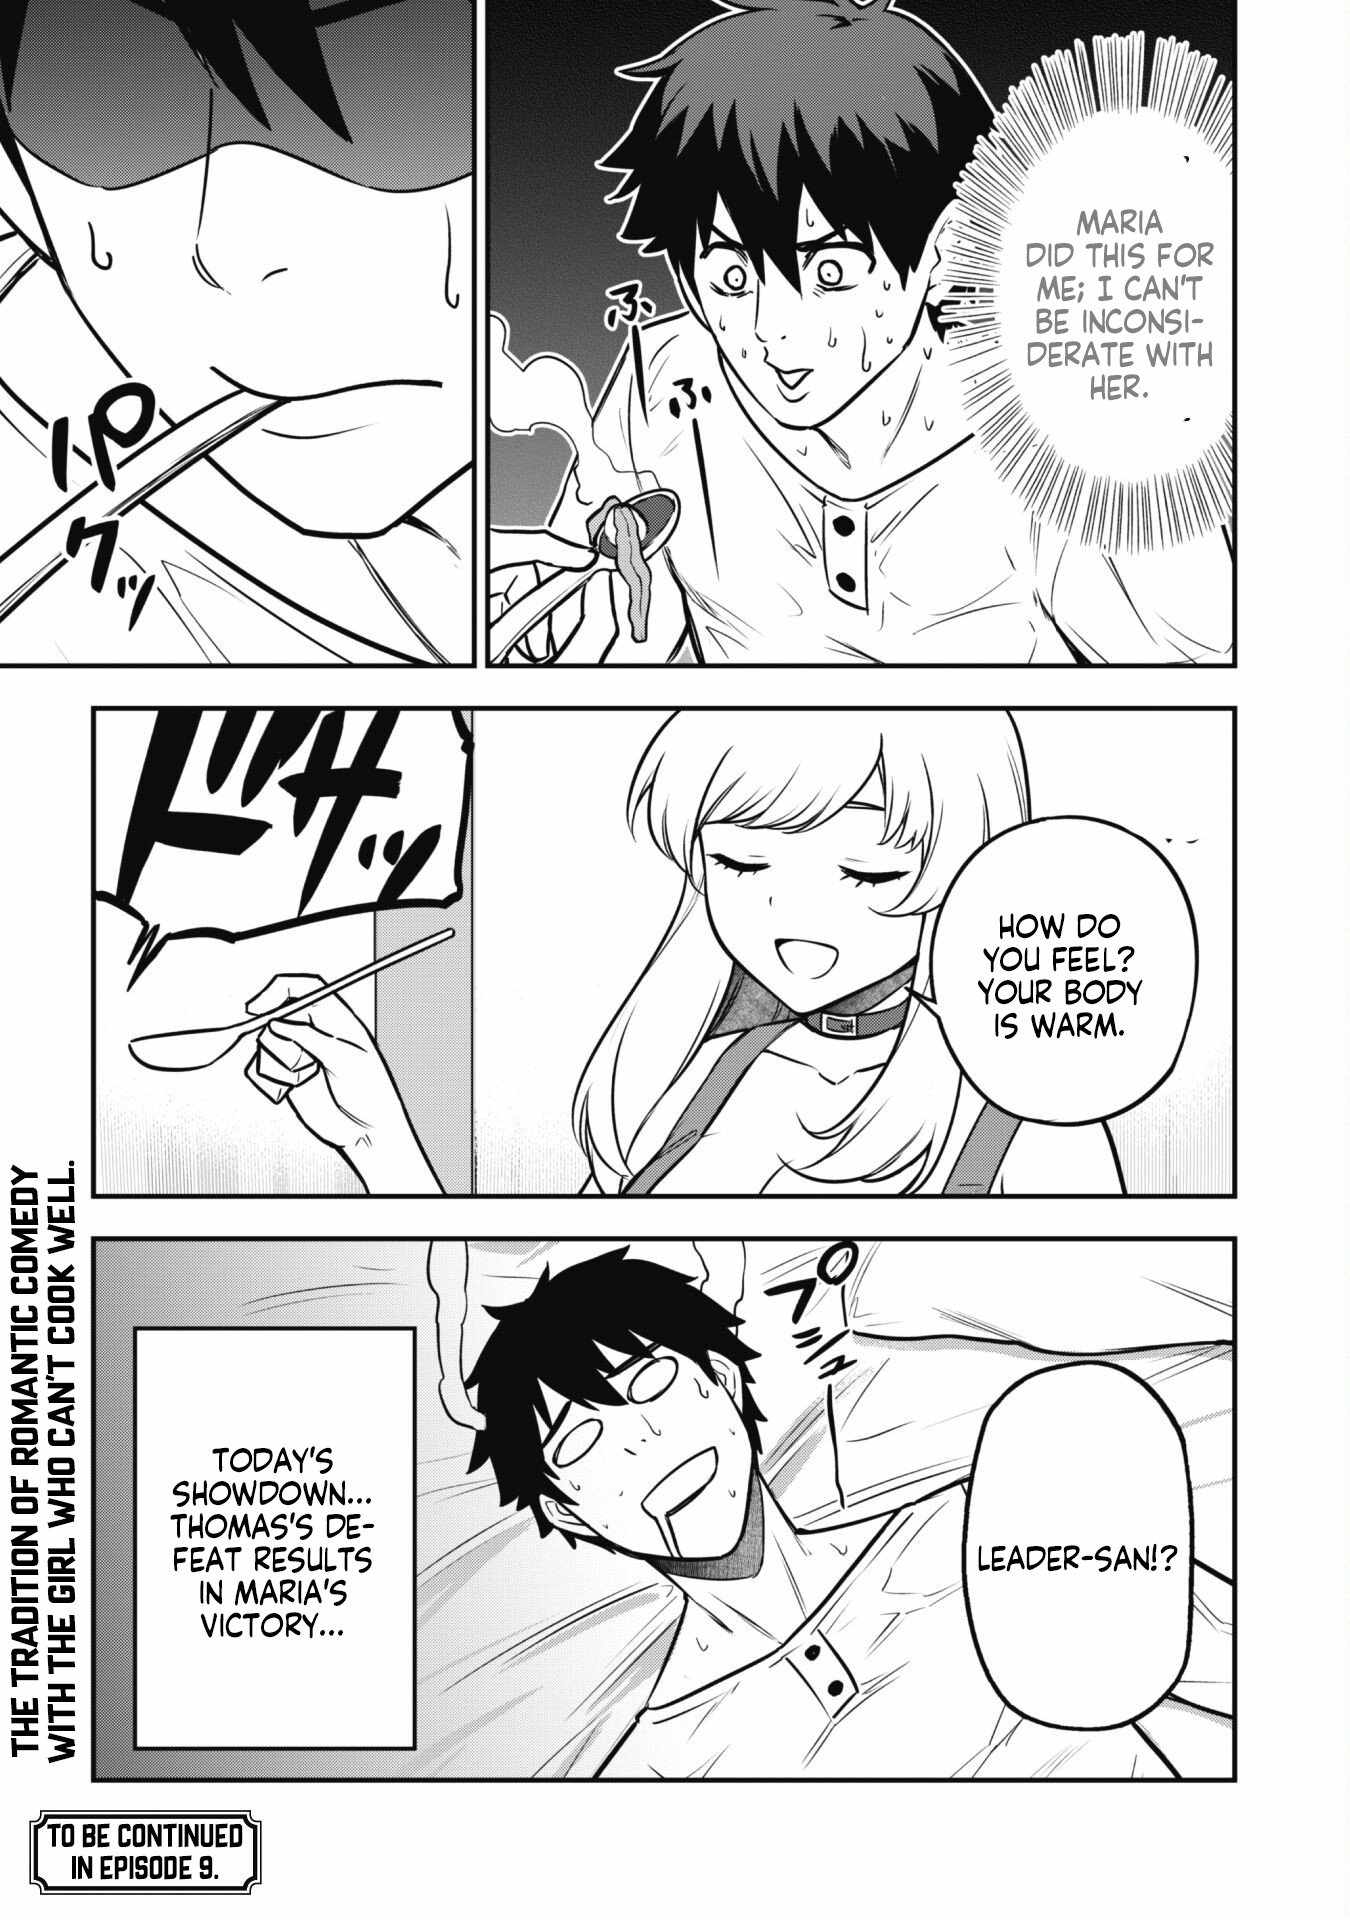 The White Mage Who Joined My Party Is a Circle Crusher, So My Isekai Life Is at Risk of Collapsing Once Again Chapter 8-2-eng-li - Page 13